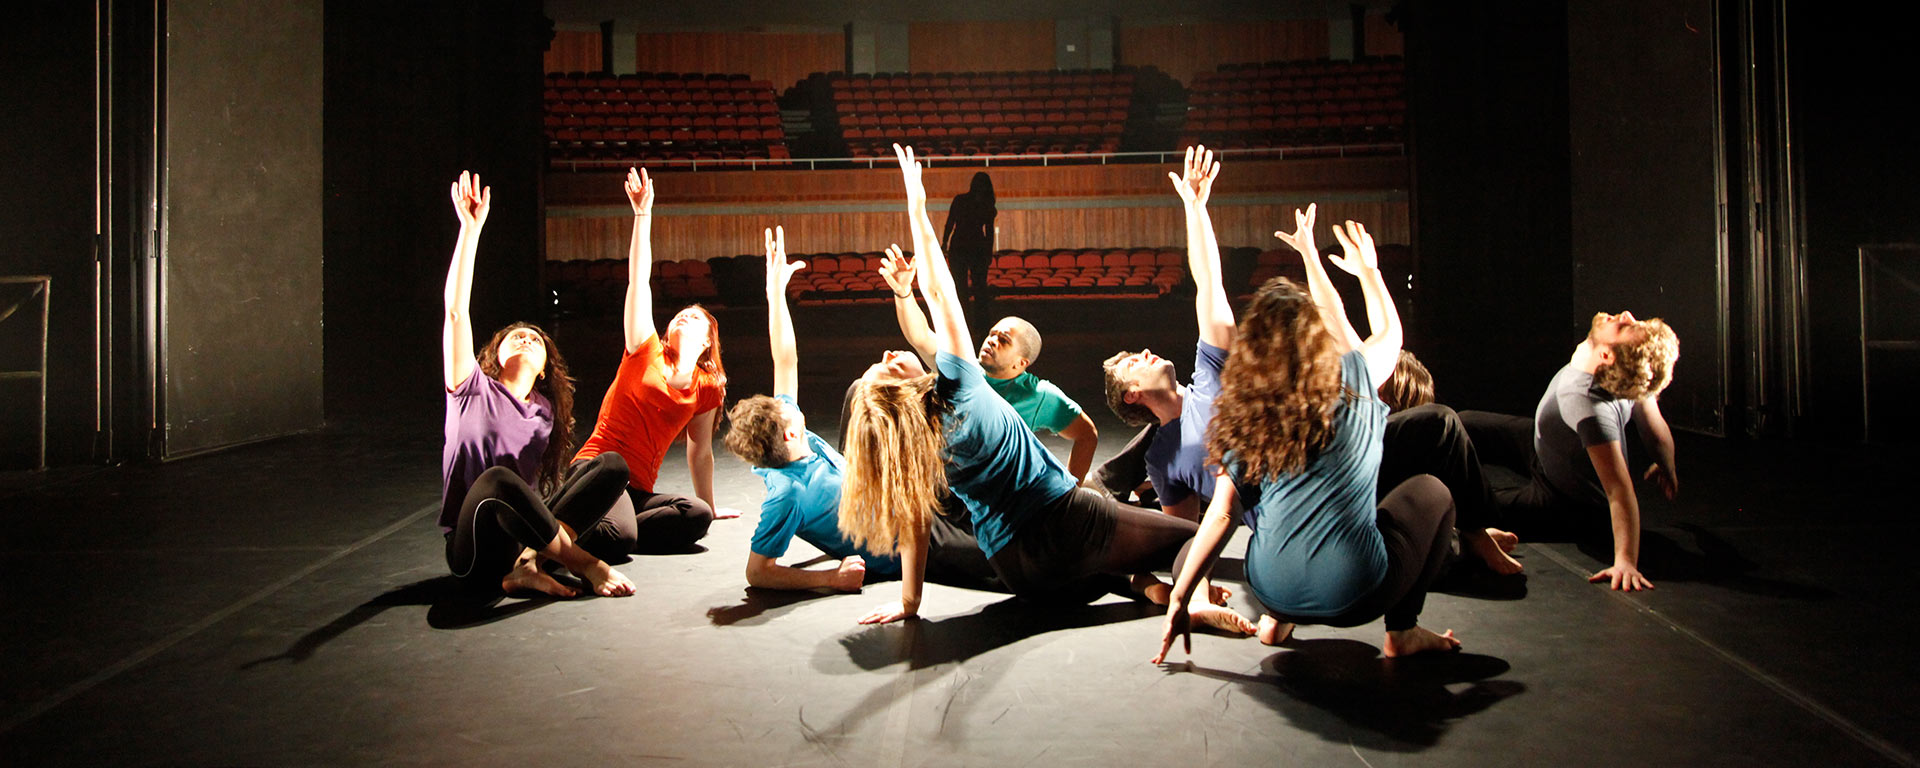 Group of students on stage crouched down toward the floor, reaching with one arm outstretched upward